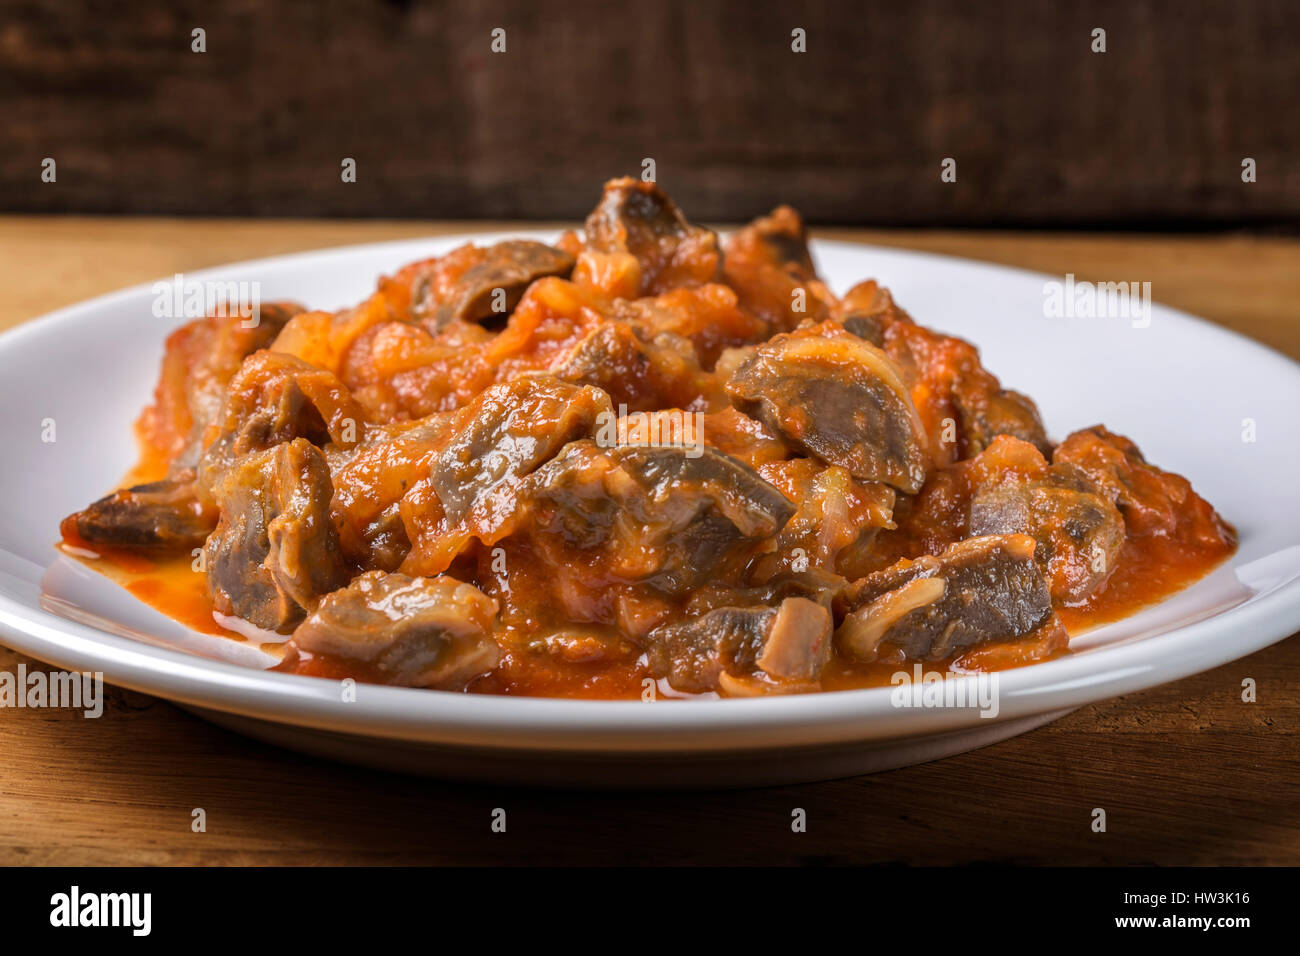 Chicken gizzard stew on plate on wooden rustic background Stock Photo